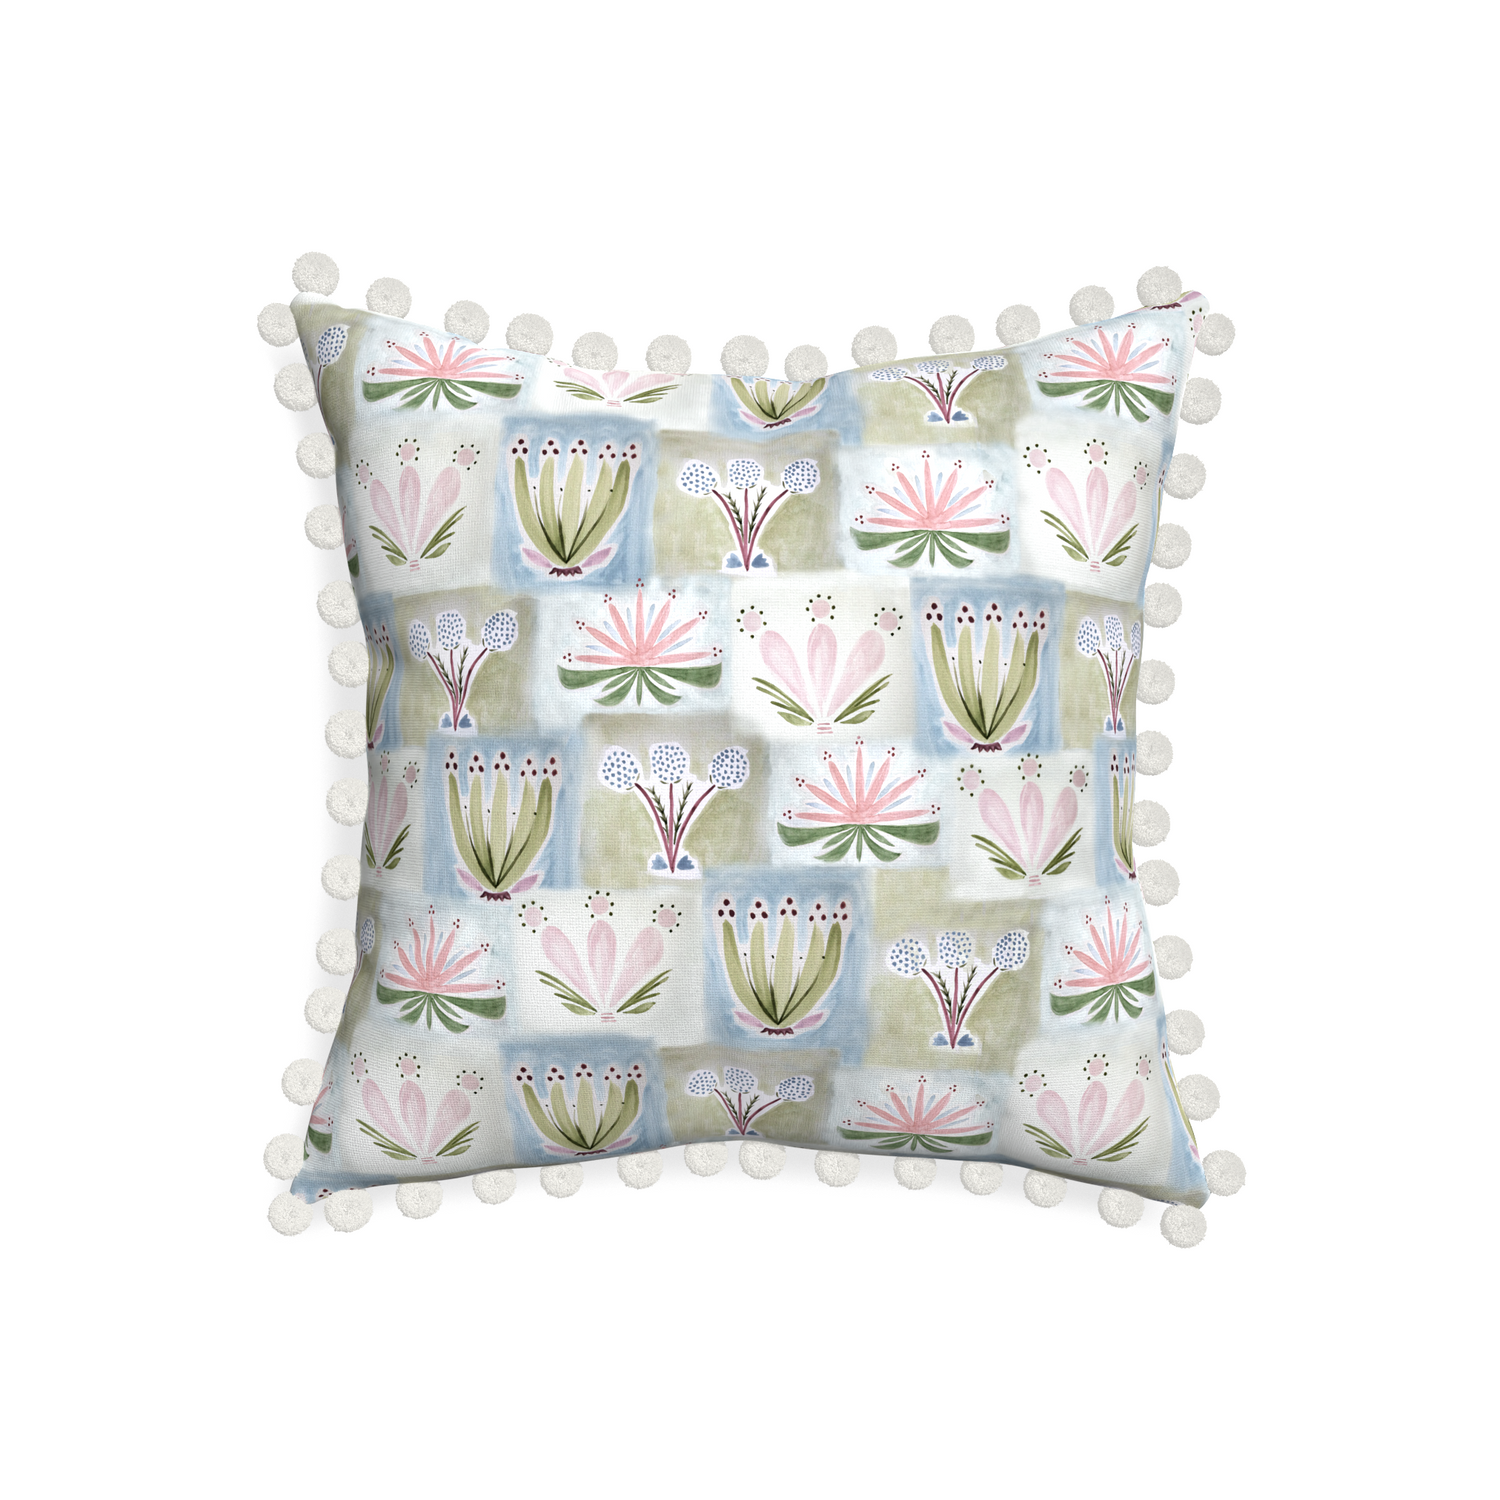 20-square harper custom hand-painted floralpillow with snow pom pom on white background